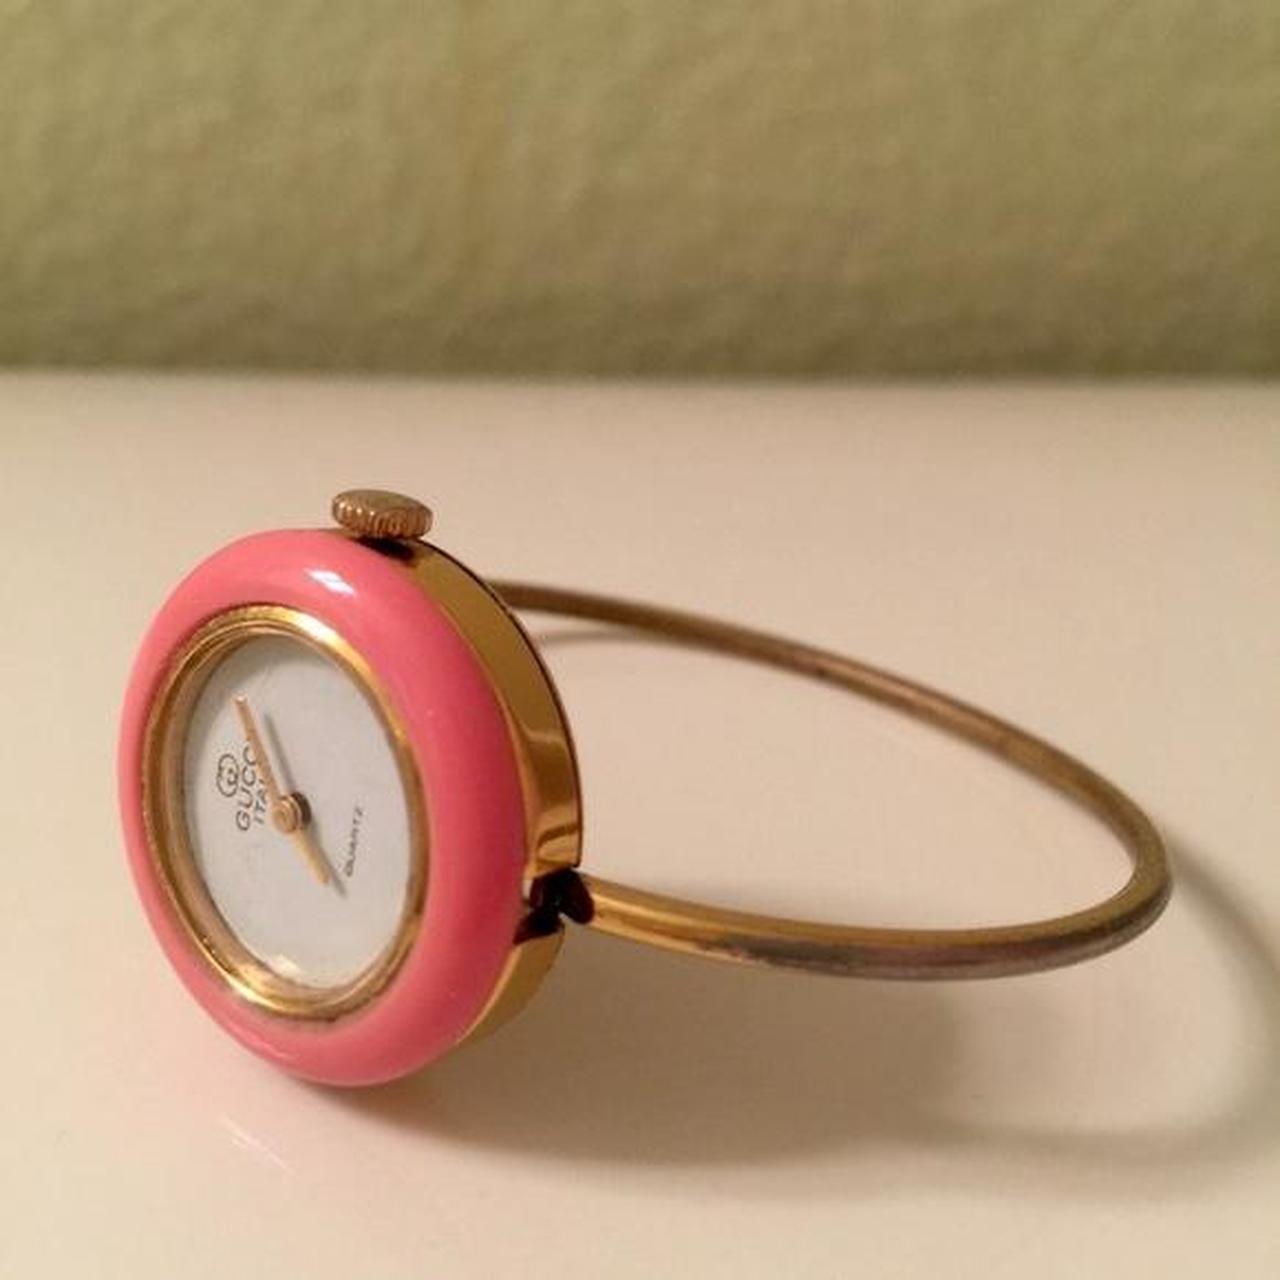 Gucci Women's Gold and Pink Watch